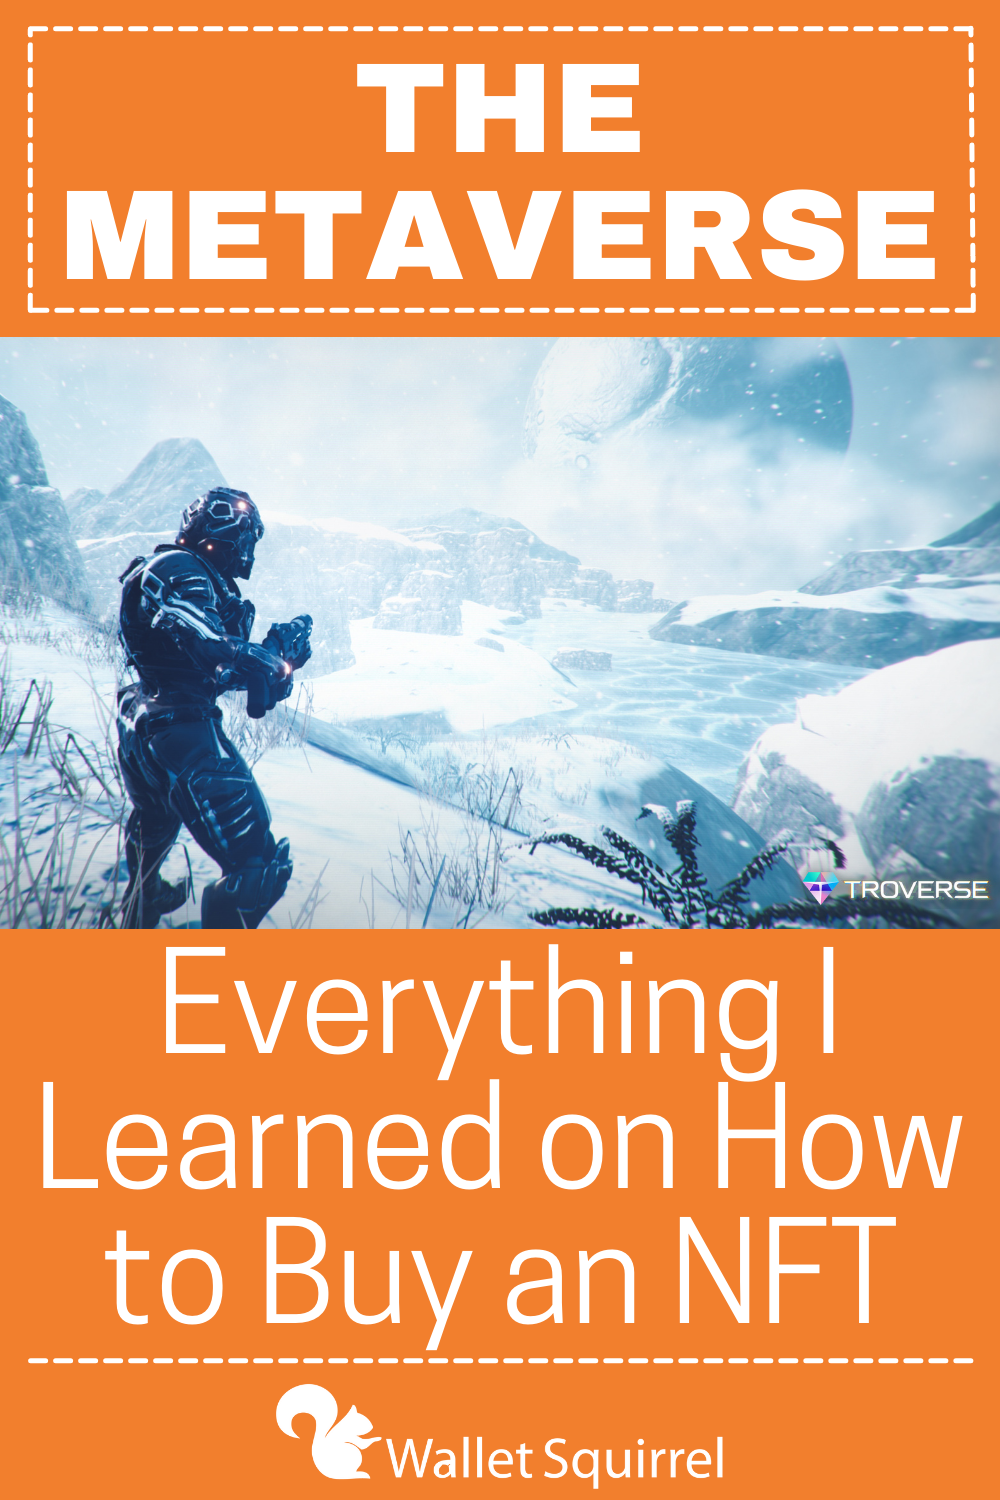 The Metaverse: Everything I Learned on How to Buy an NFT